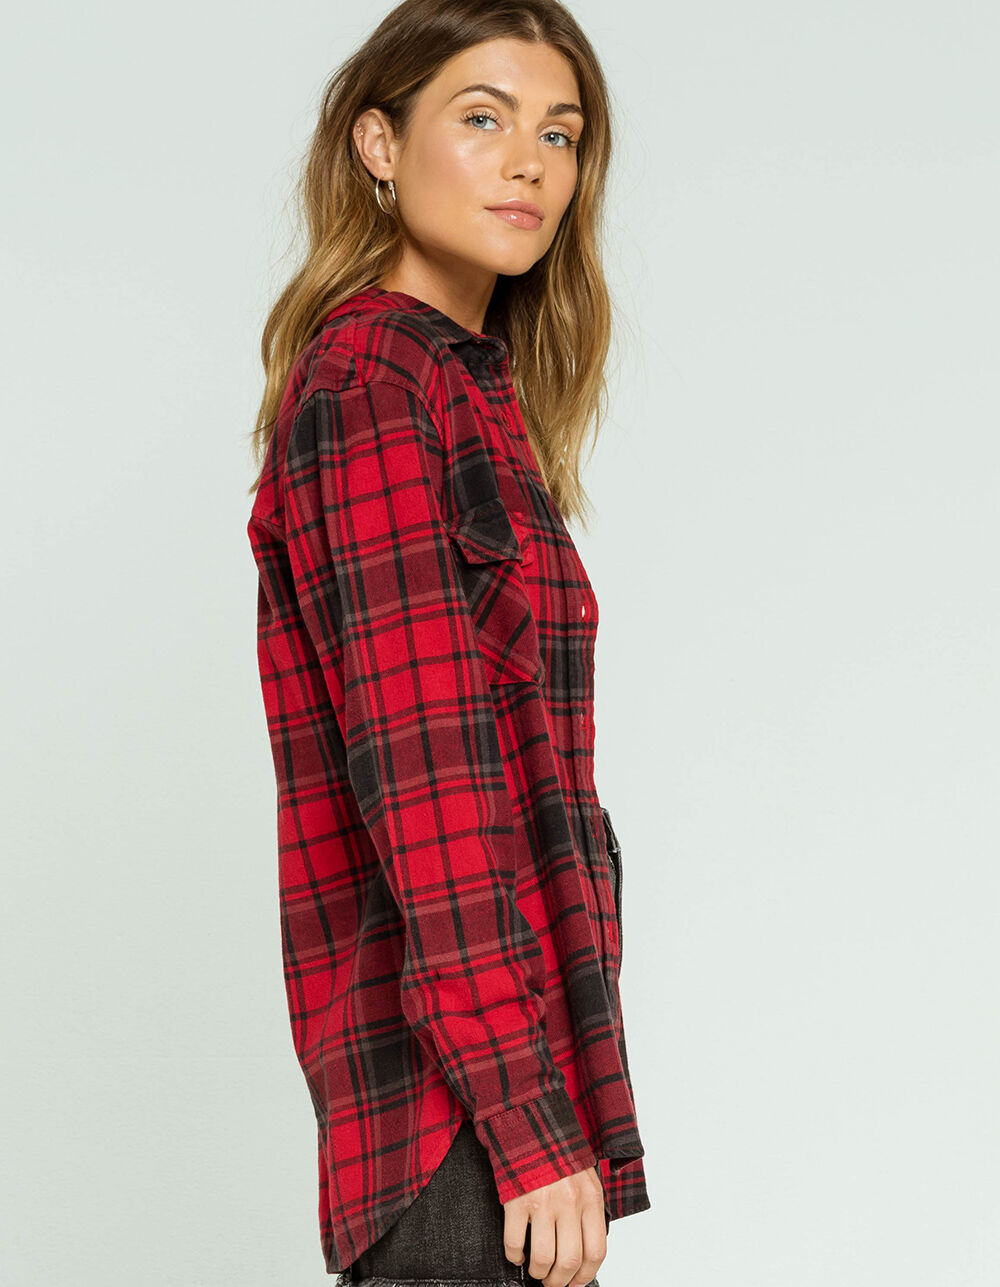 RSQ Cobain Washed Womens Flannel Shirt - RED/BLACK | Tillys